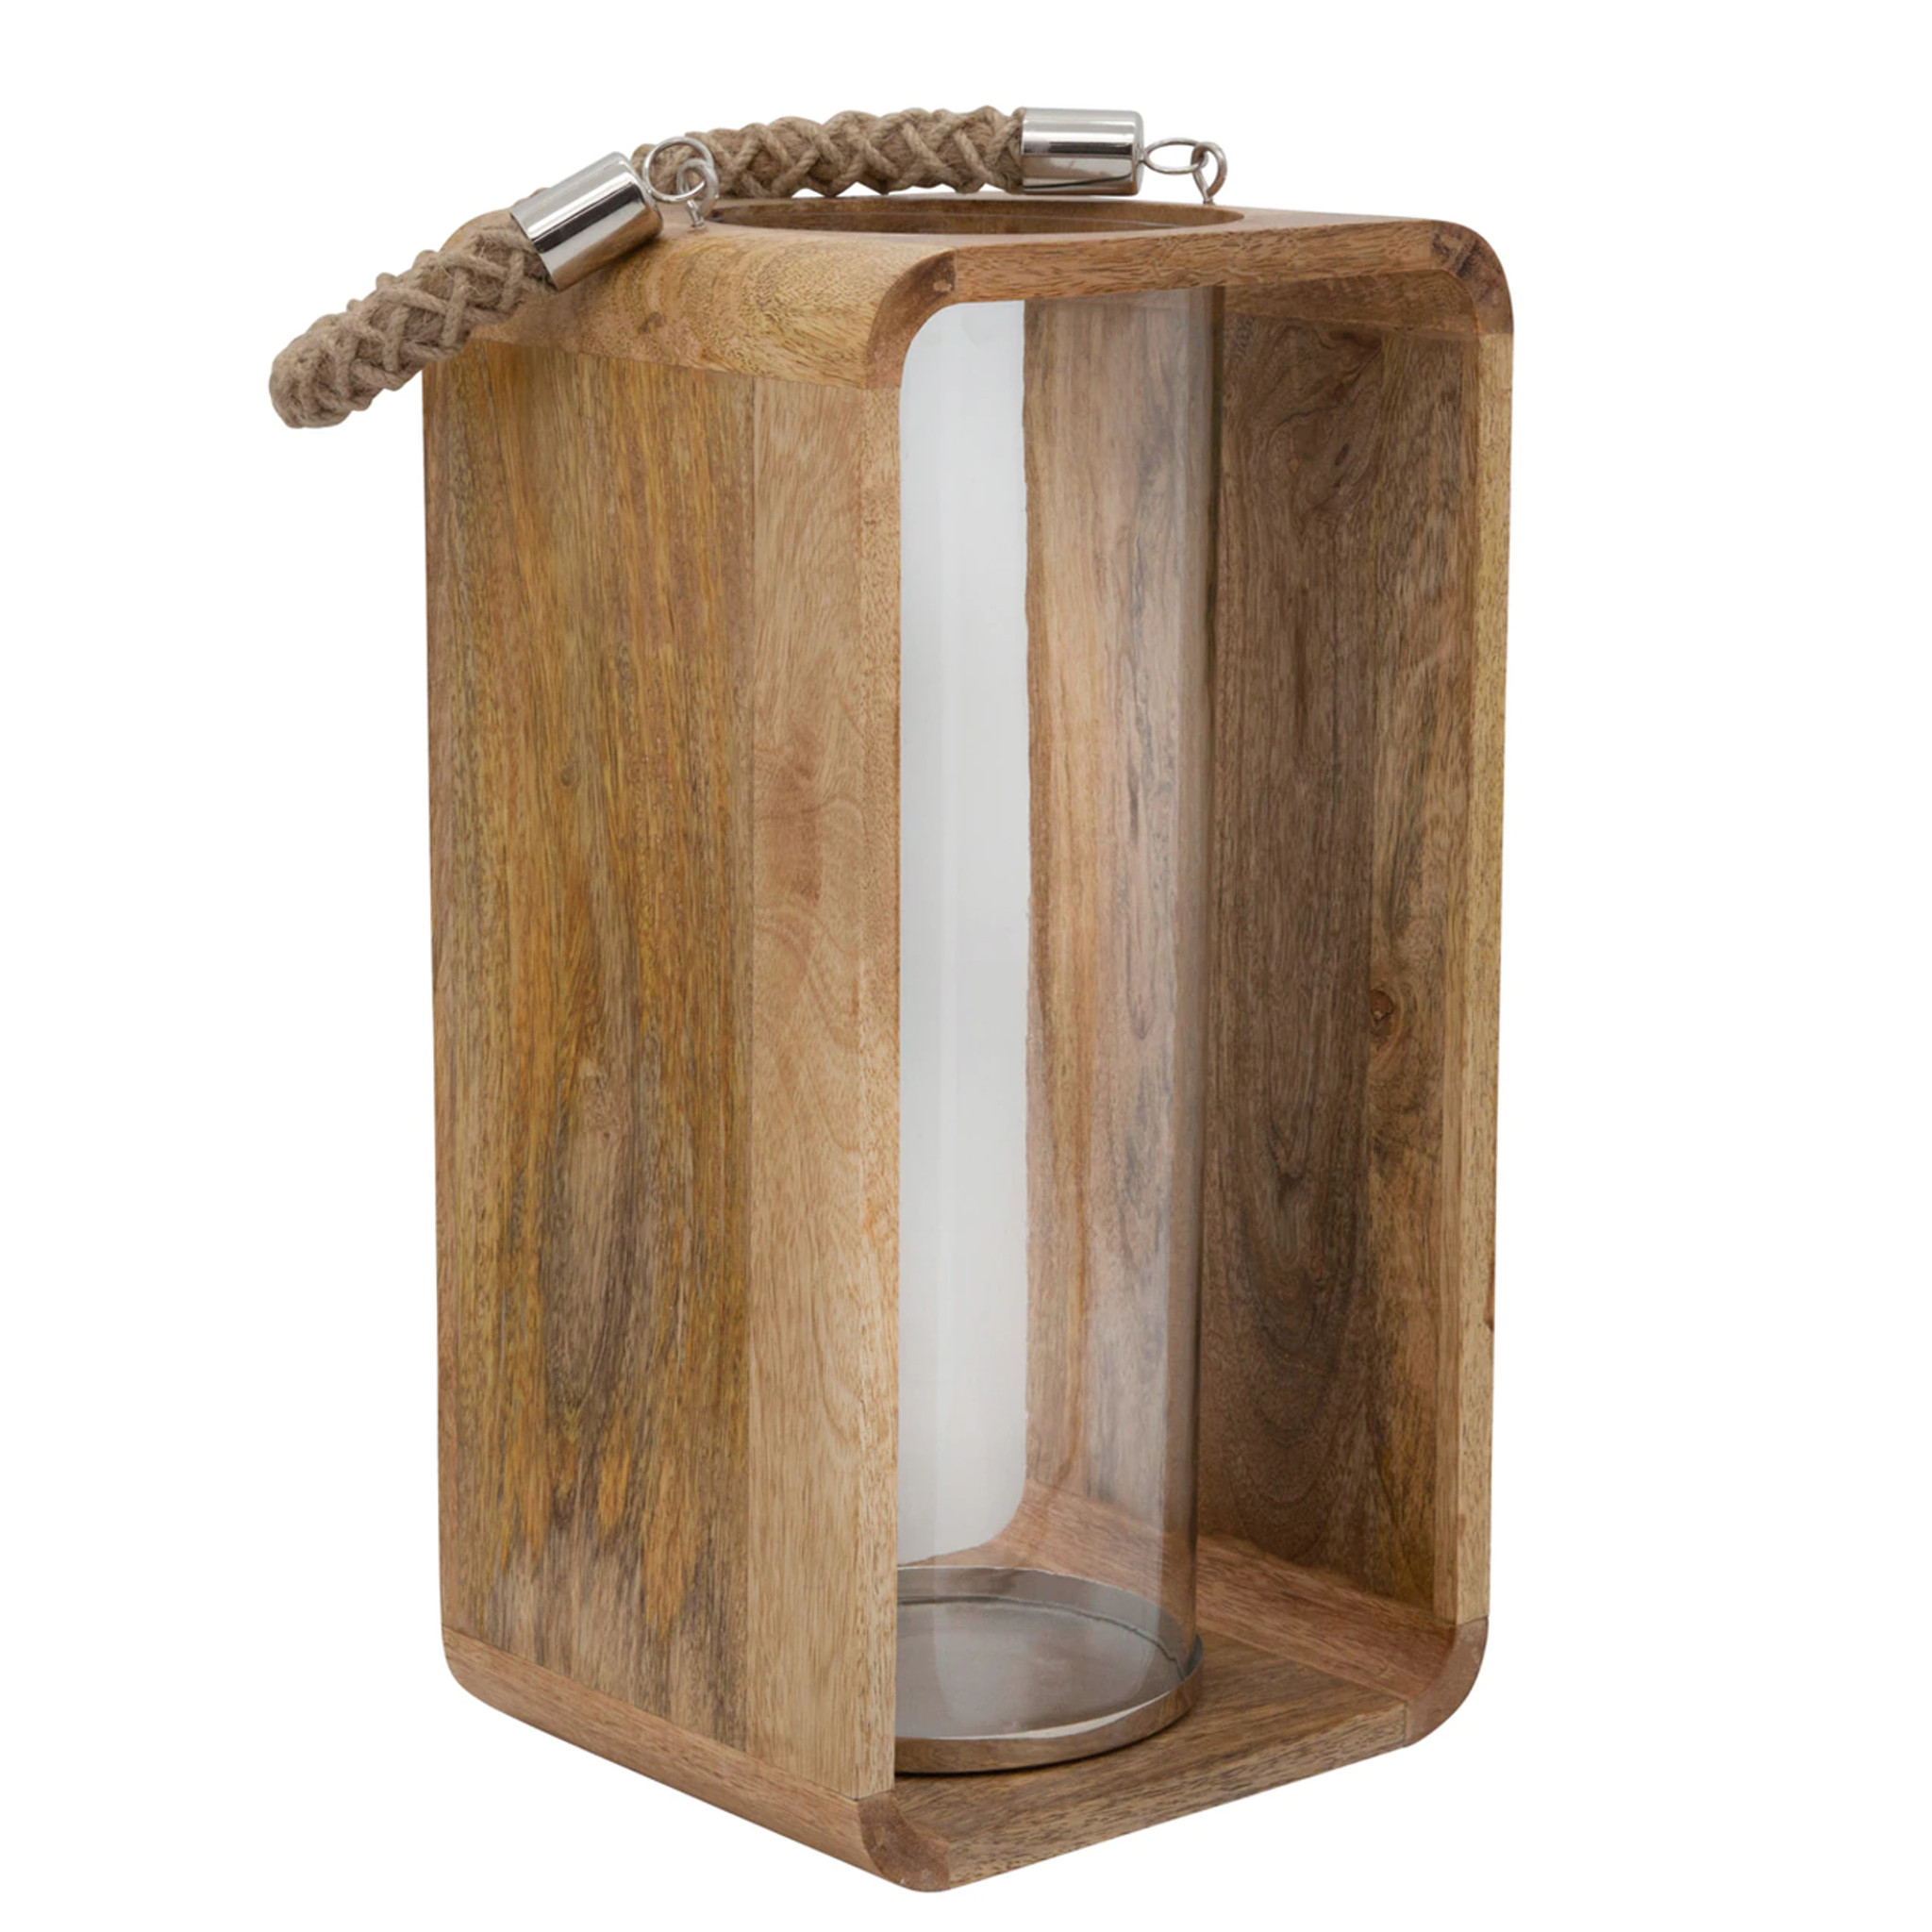 Rounded Wood Lantern with Rope Handle, Size Options